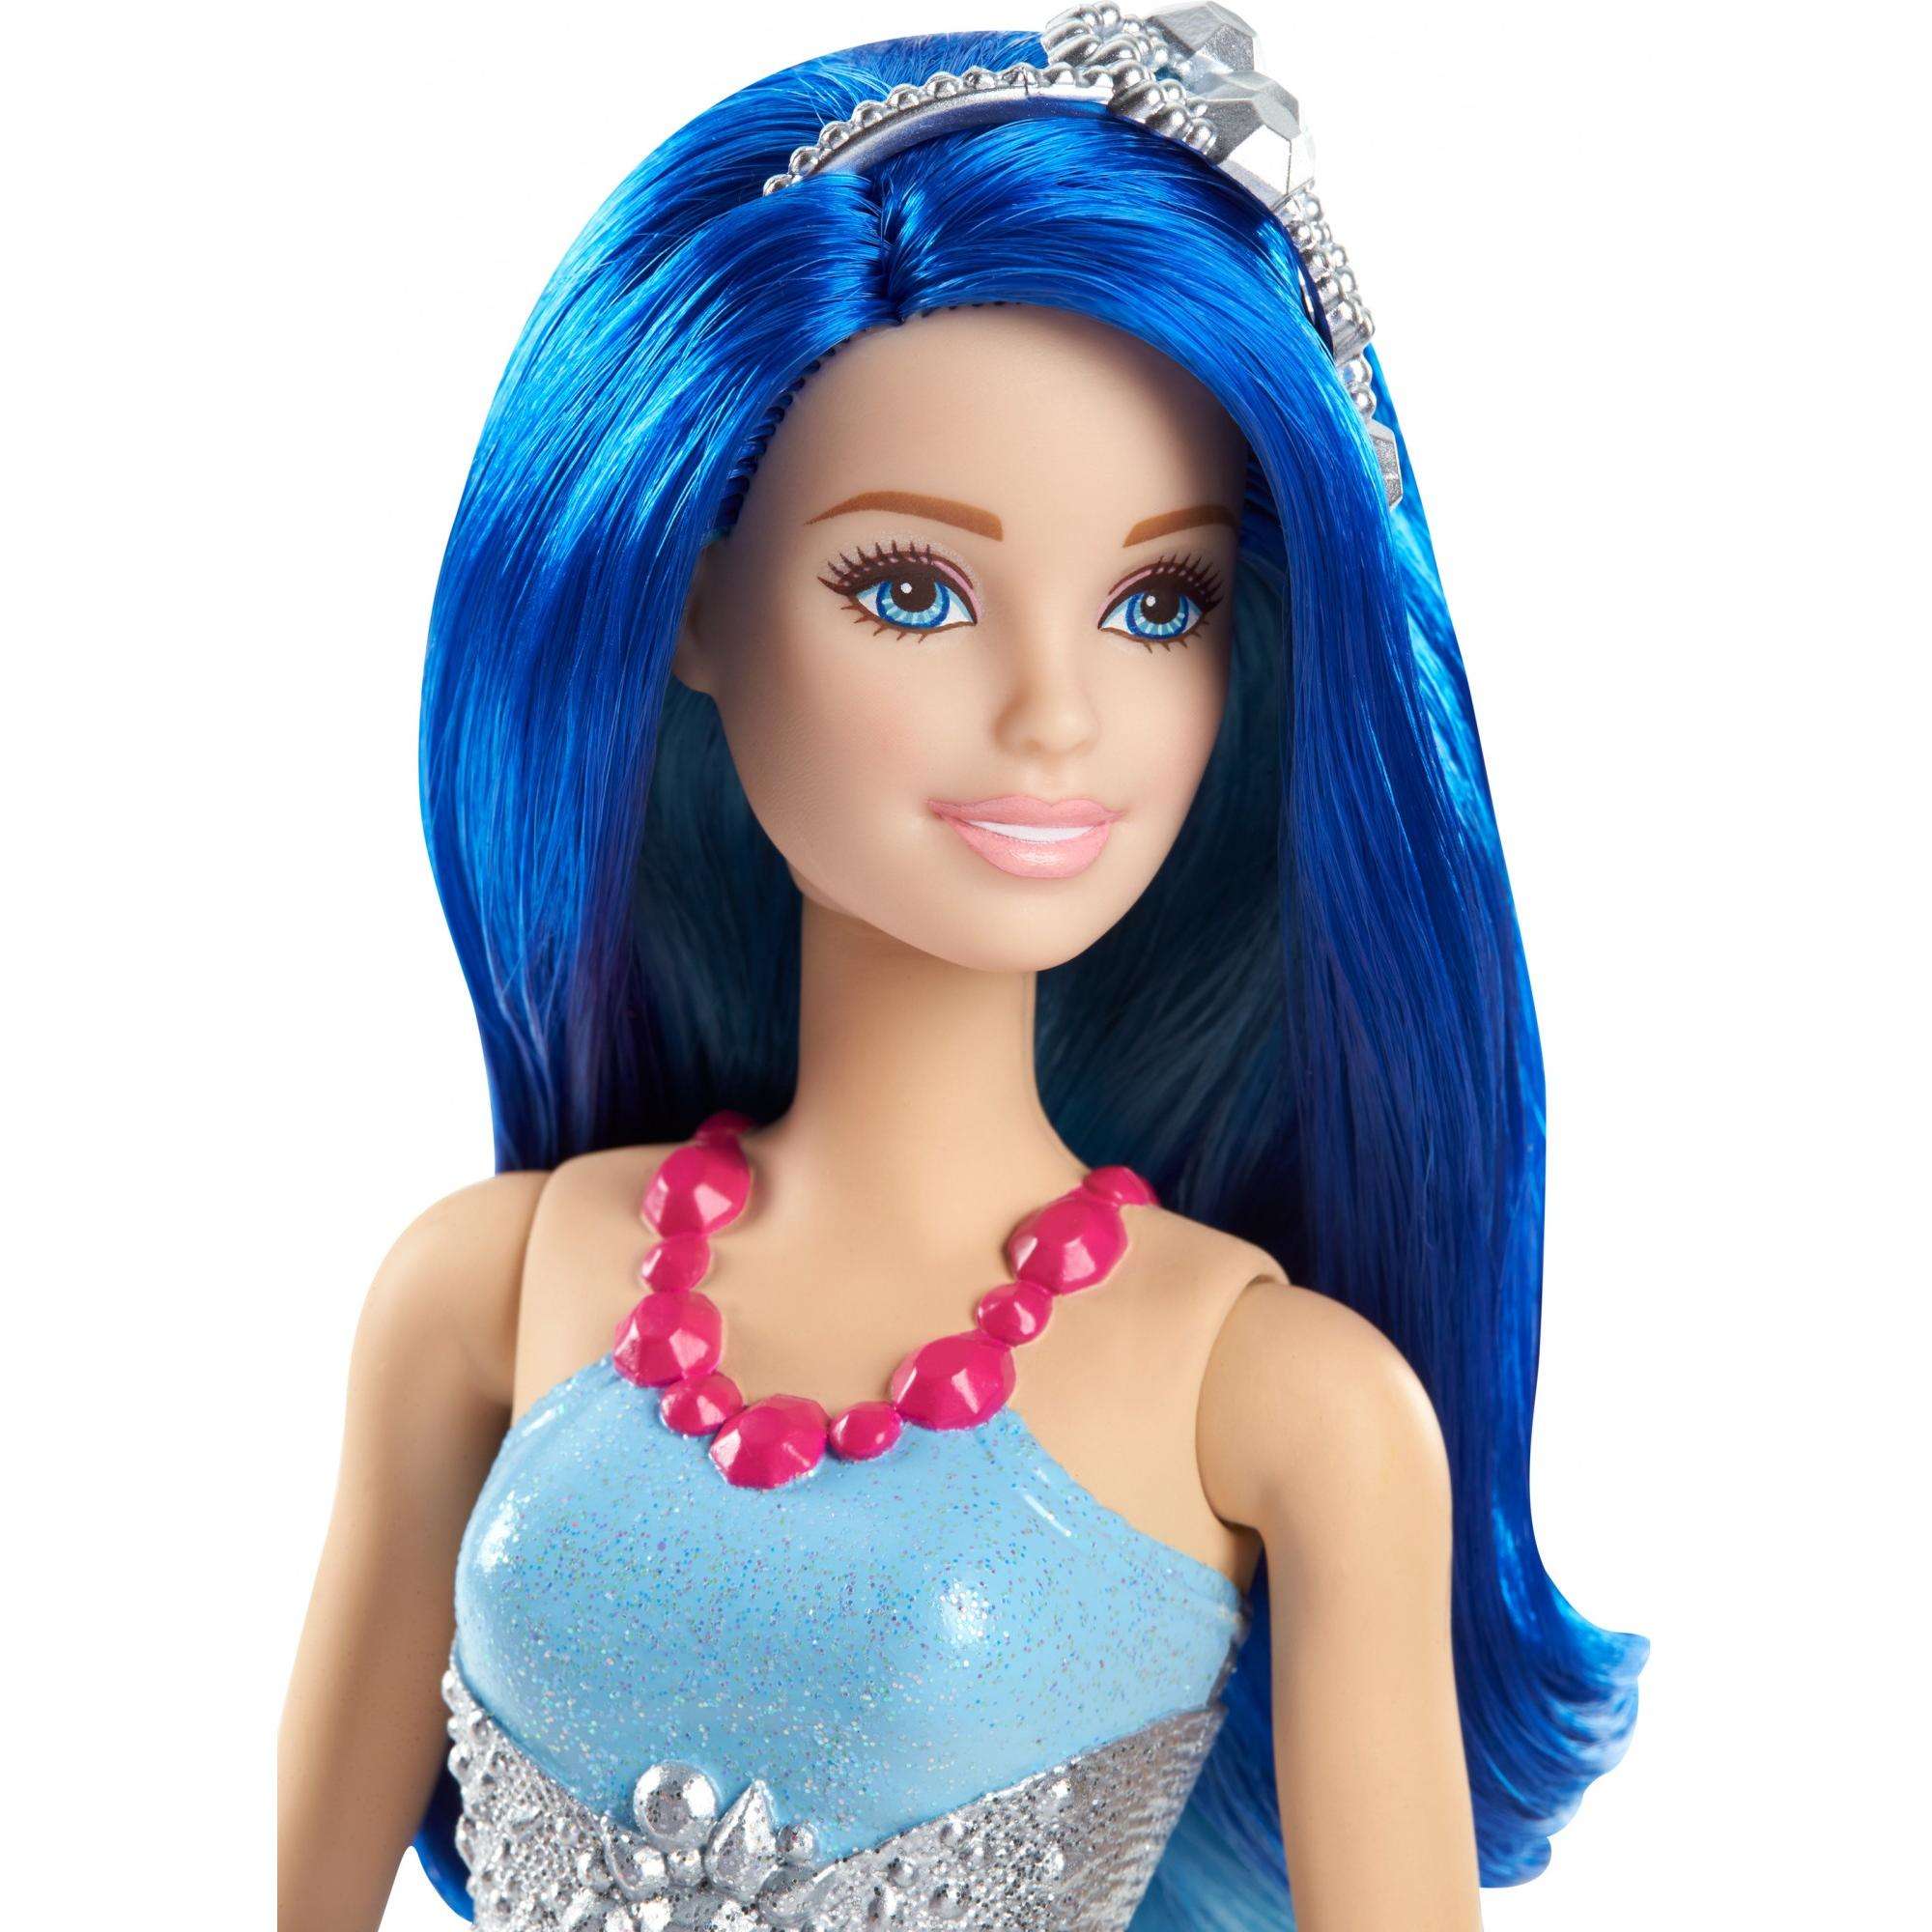 Barbie Dreamtopia Mermaid Doll with Blue Jewel-Themed Tail - image 3 of 5